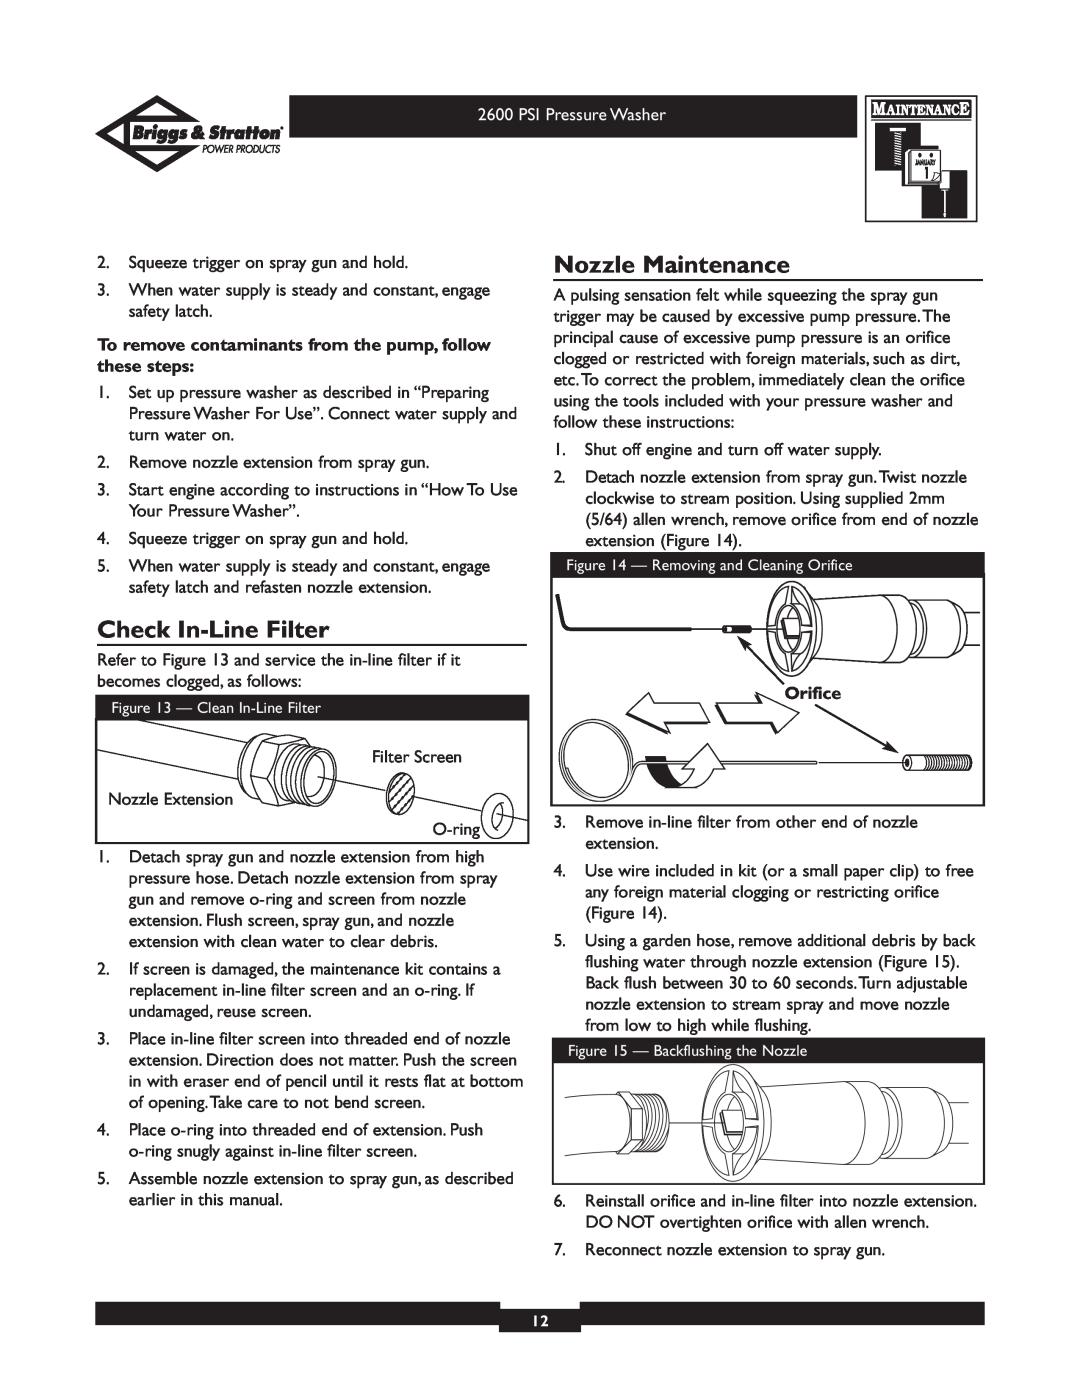 Briggs & Stratton 20216 Nozzle Maintenance, Check In-Line Filter, To remove contaminants from the pump, follow these steps 